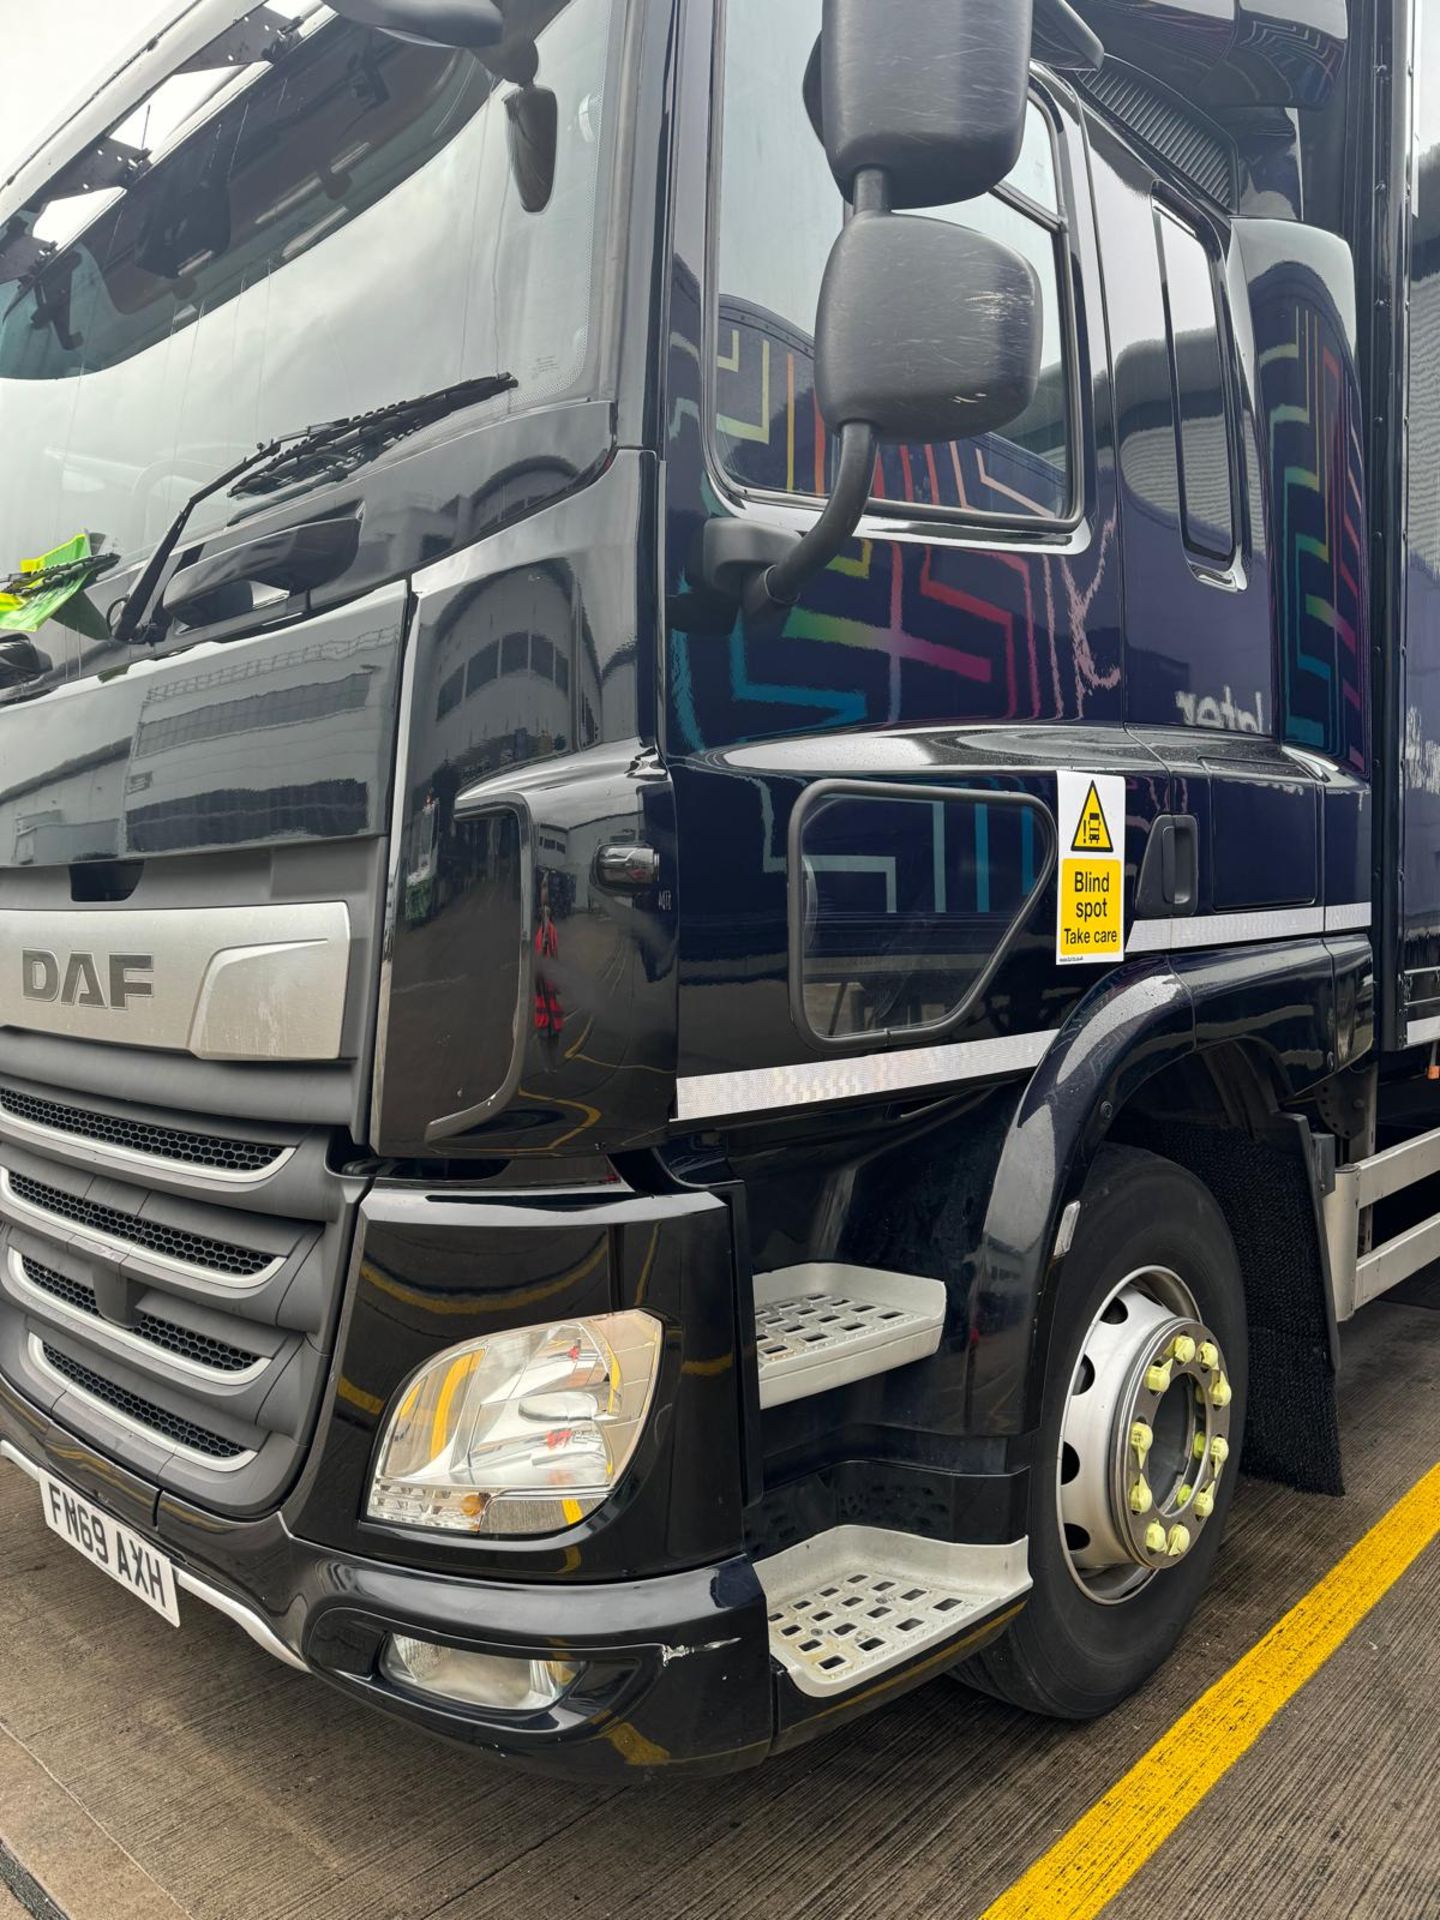 2019, DAF CF 260 FA - FN69 AXH (18 Ton Rigid Truck with Tail Lift) - Image 8 of 22